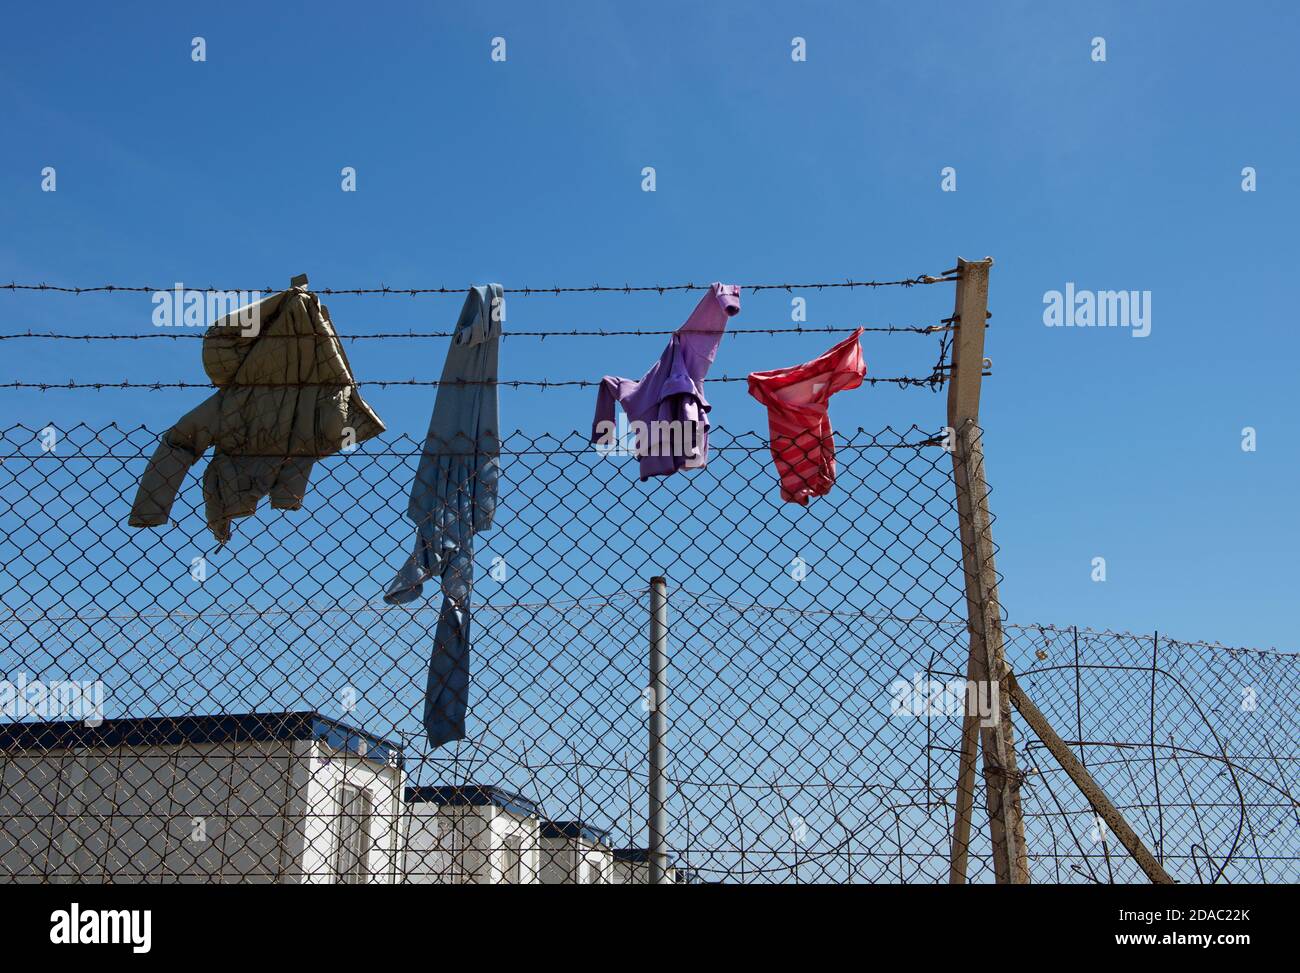 Immigrant centre, laundry on a wire. Social issue. Life beyond fence. Immgiration centre in Malta Stock Photo